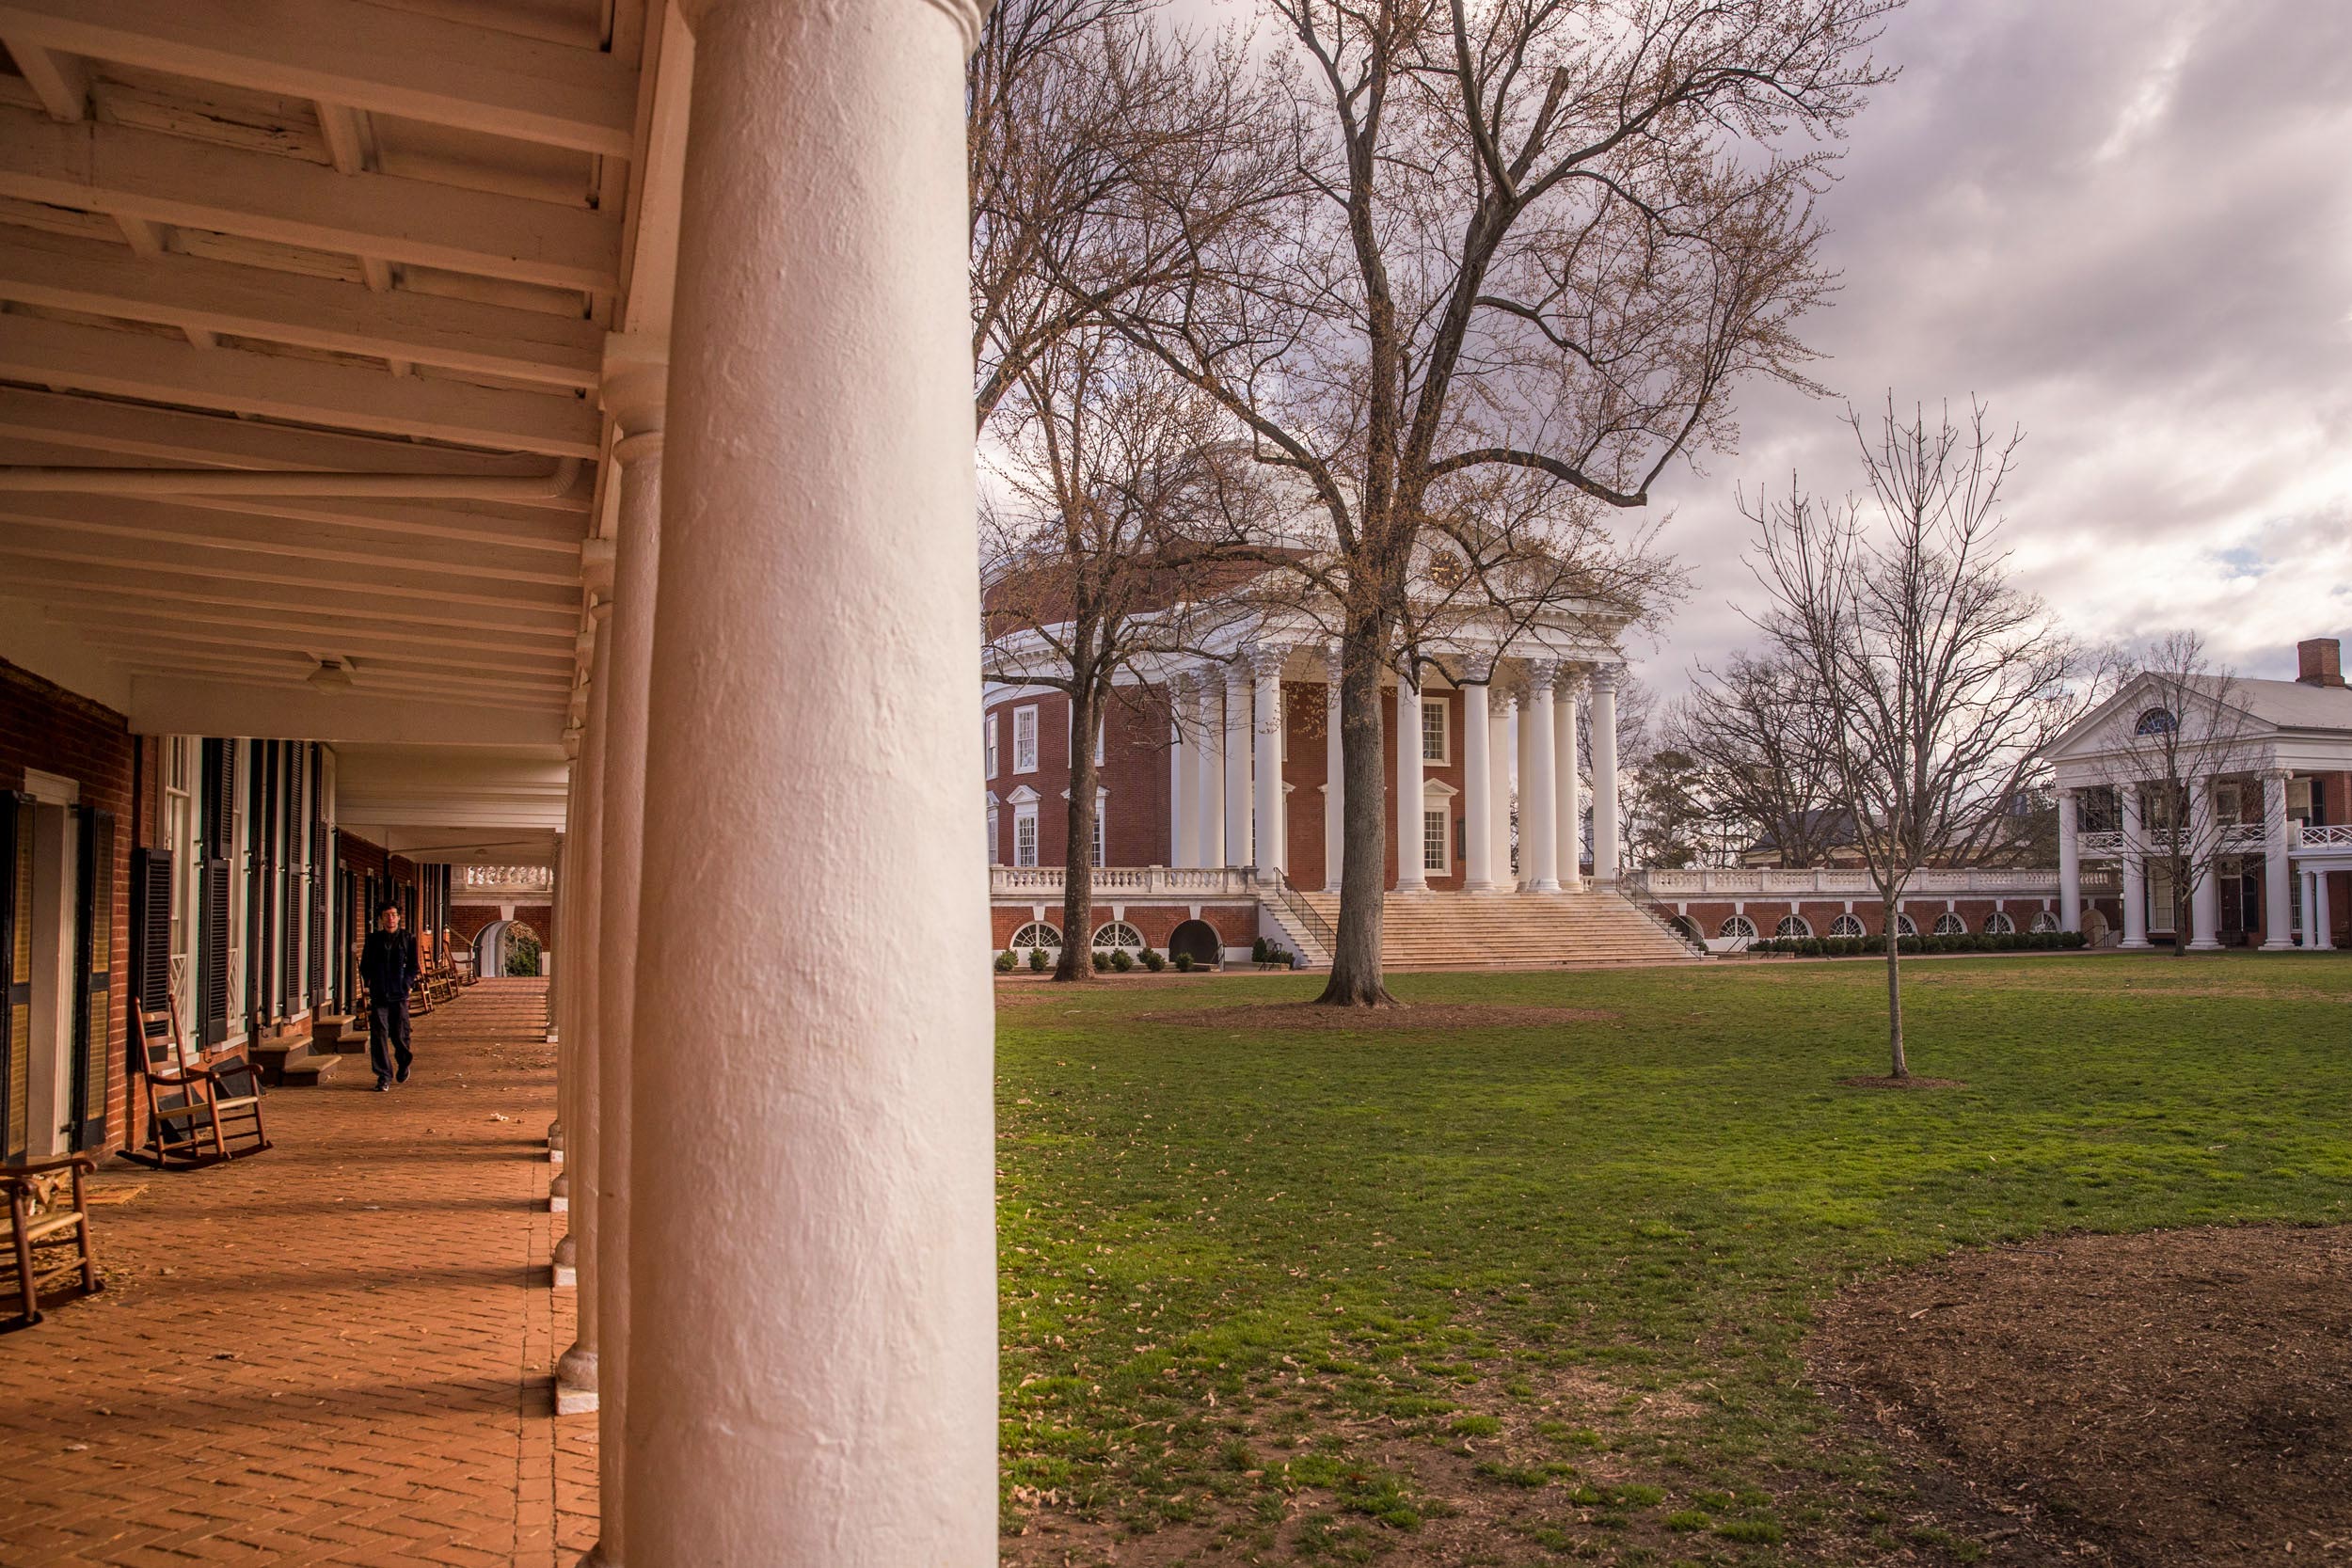 View of the Rotunda from the Lawn room walkway